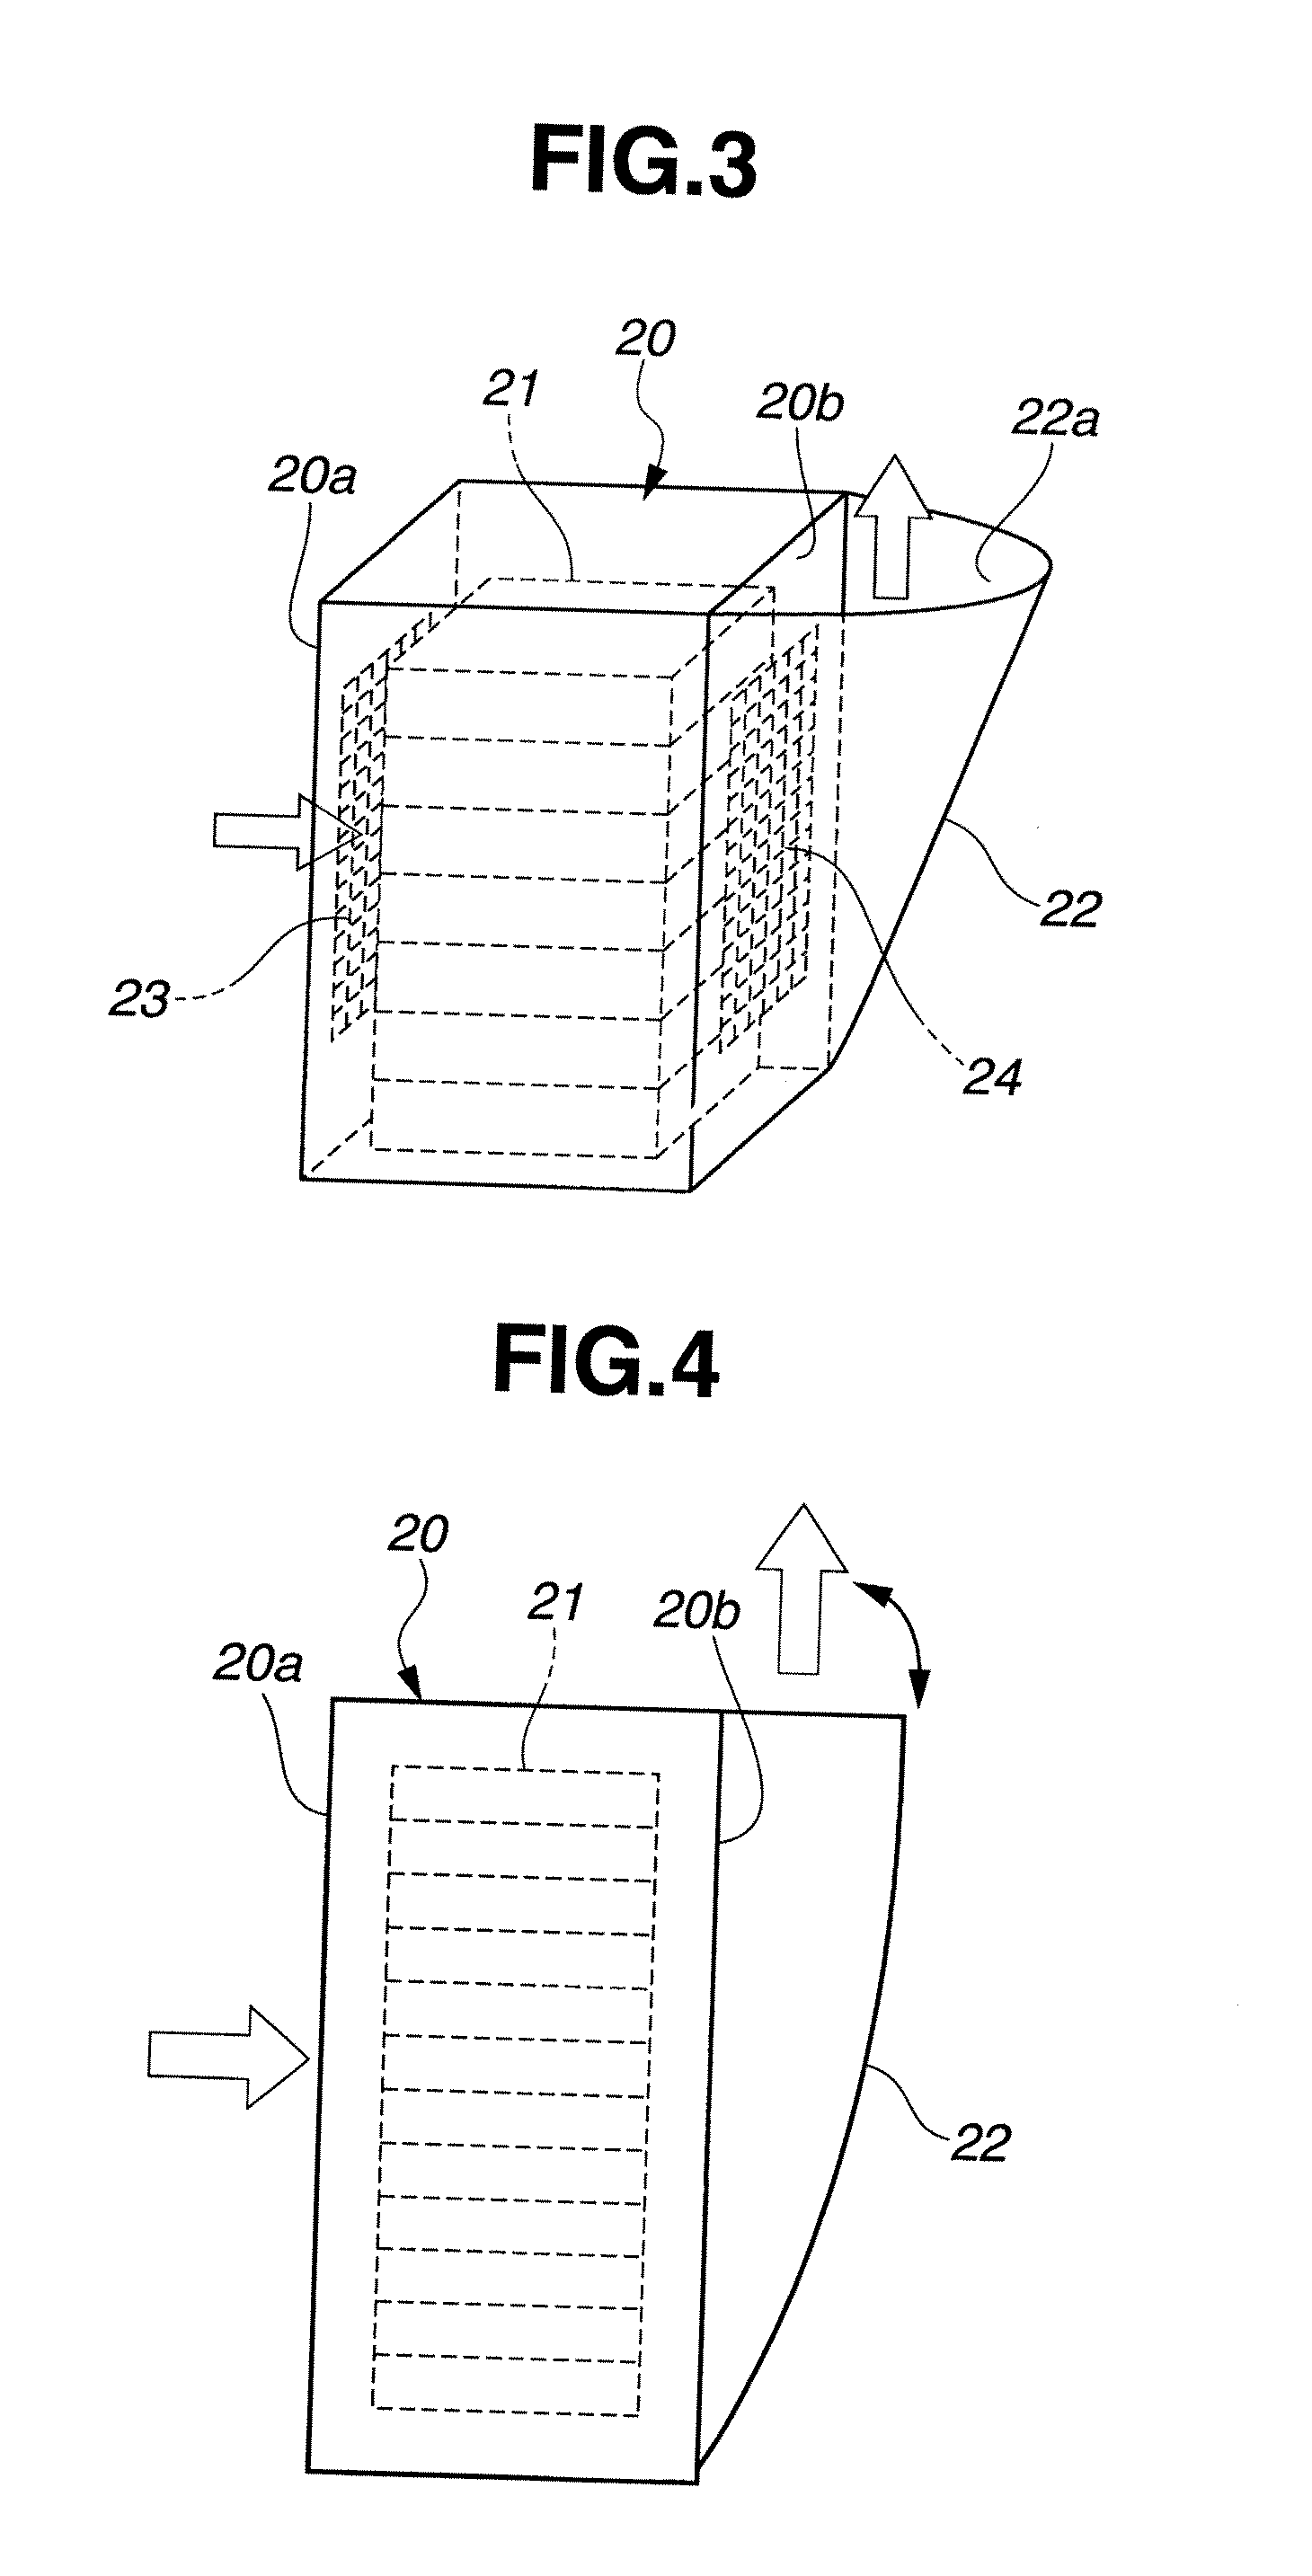 Cover, electronic device rack, and air conditioning system